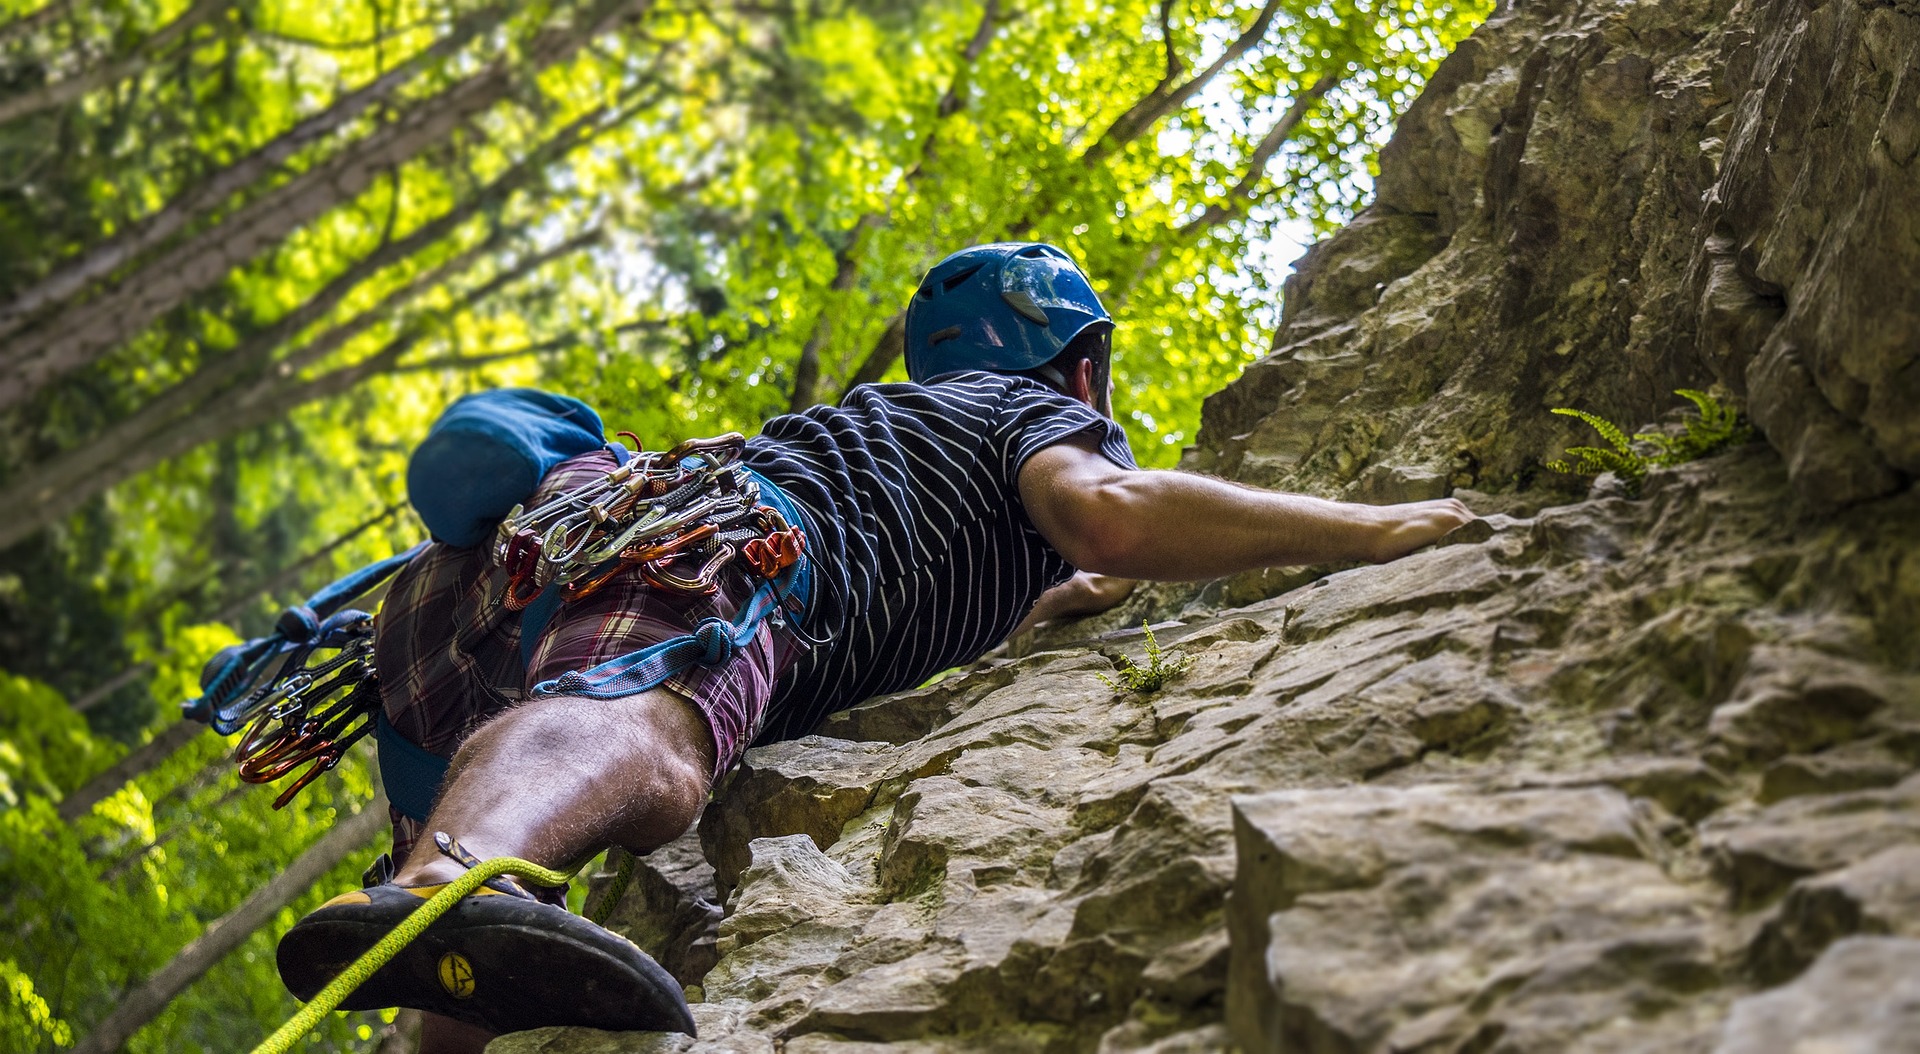 Wrocław Outdoor Climbing and Bouldering Guide